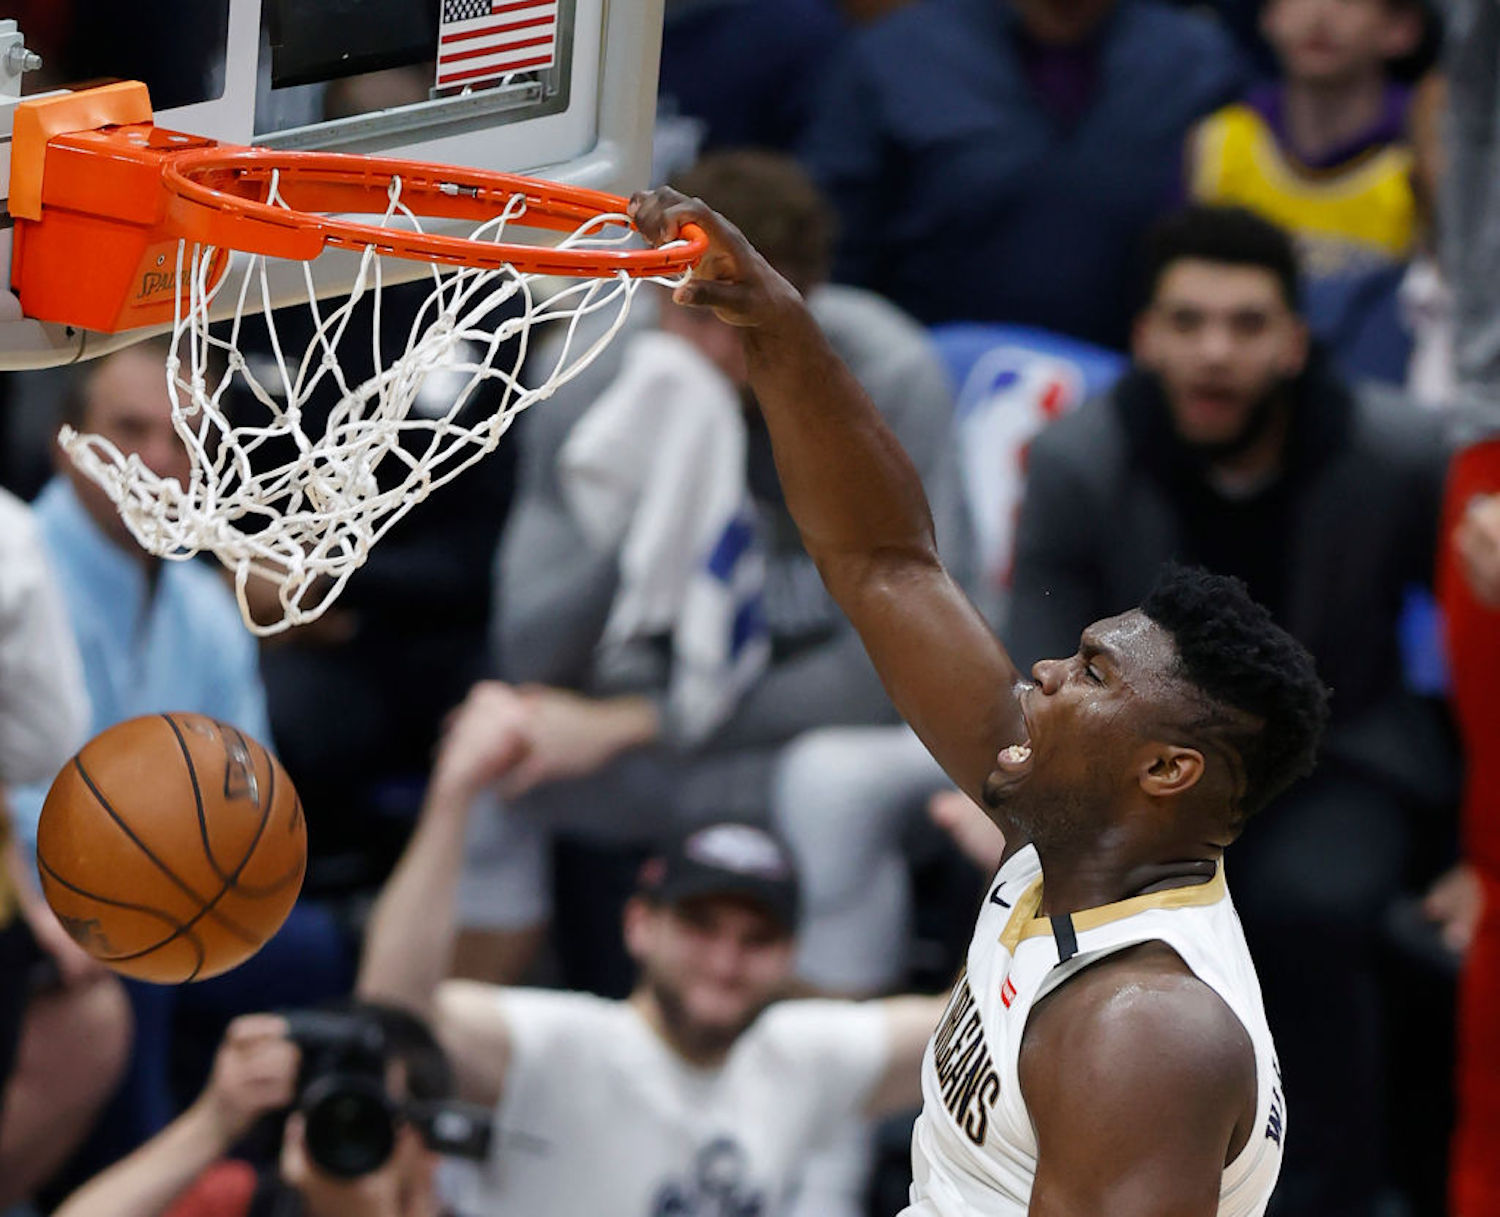 Zion Williamson was impressive last season as a rookie, but Pelicans VP David Griffin says we haven't even seen him at his best yet.